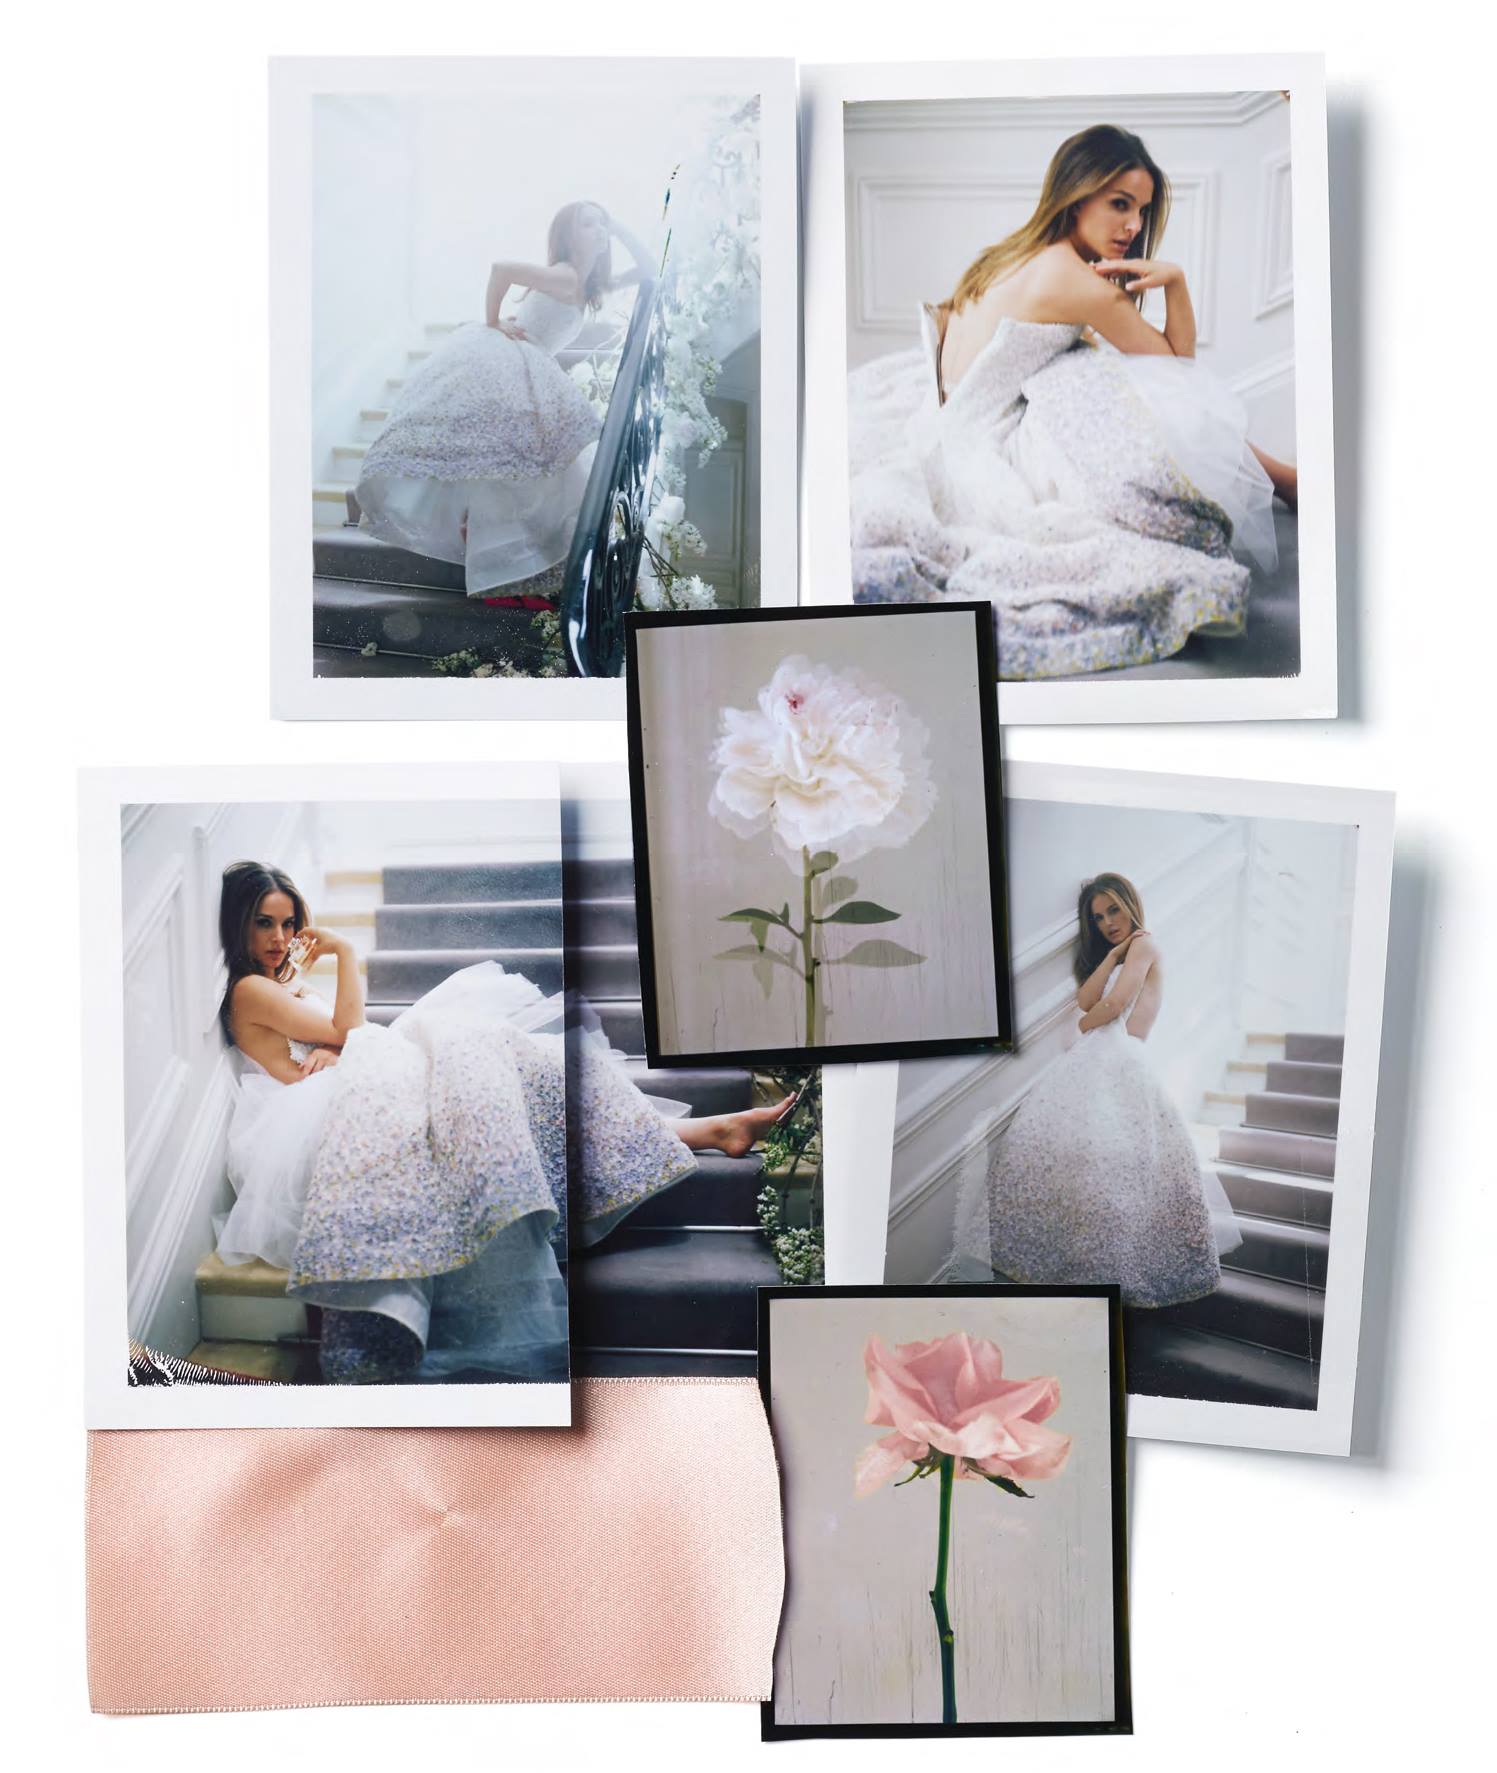 ad campaign : miss dior blooming scent